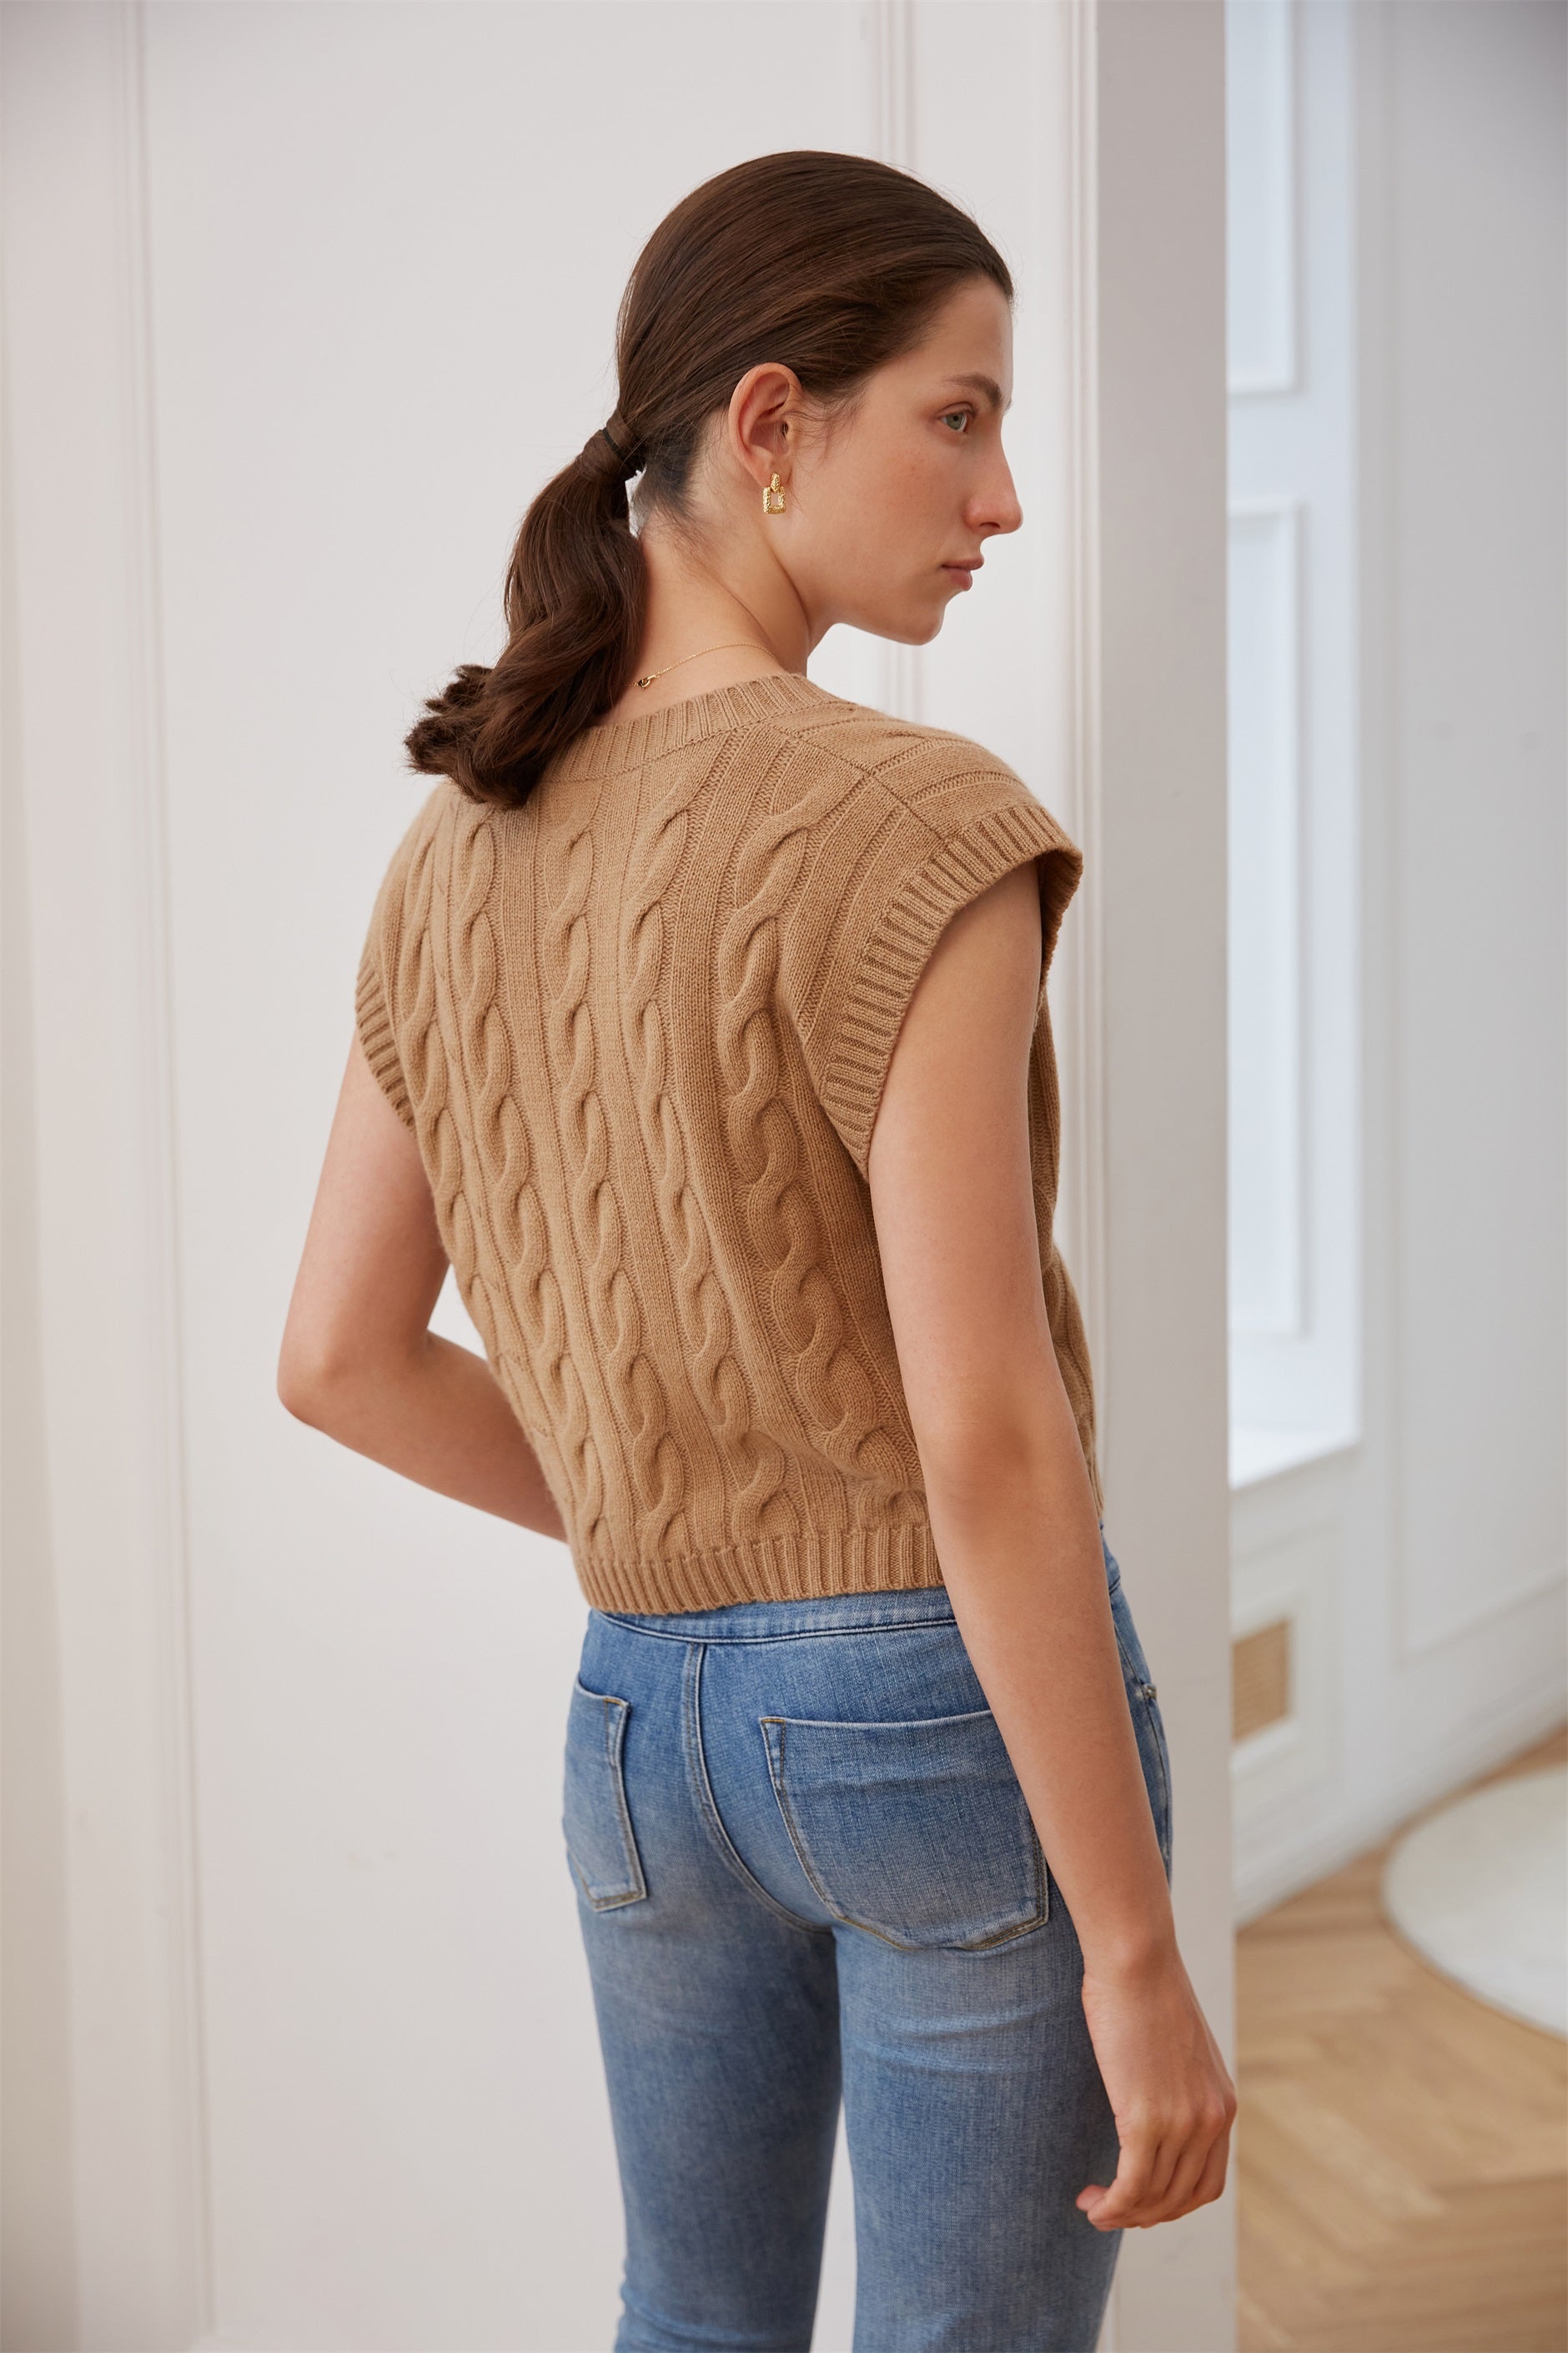 knit vest, knitted vest womens, cable knit sweater vest, cable knit vest , knit vest outfits, cashmere vest, cashmere sweater vest, cashmere vest womens, cashmere sweater vest womens, cable knit sweater vest, camel sweater vest, cable knit sweater vest